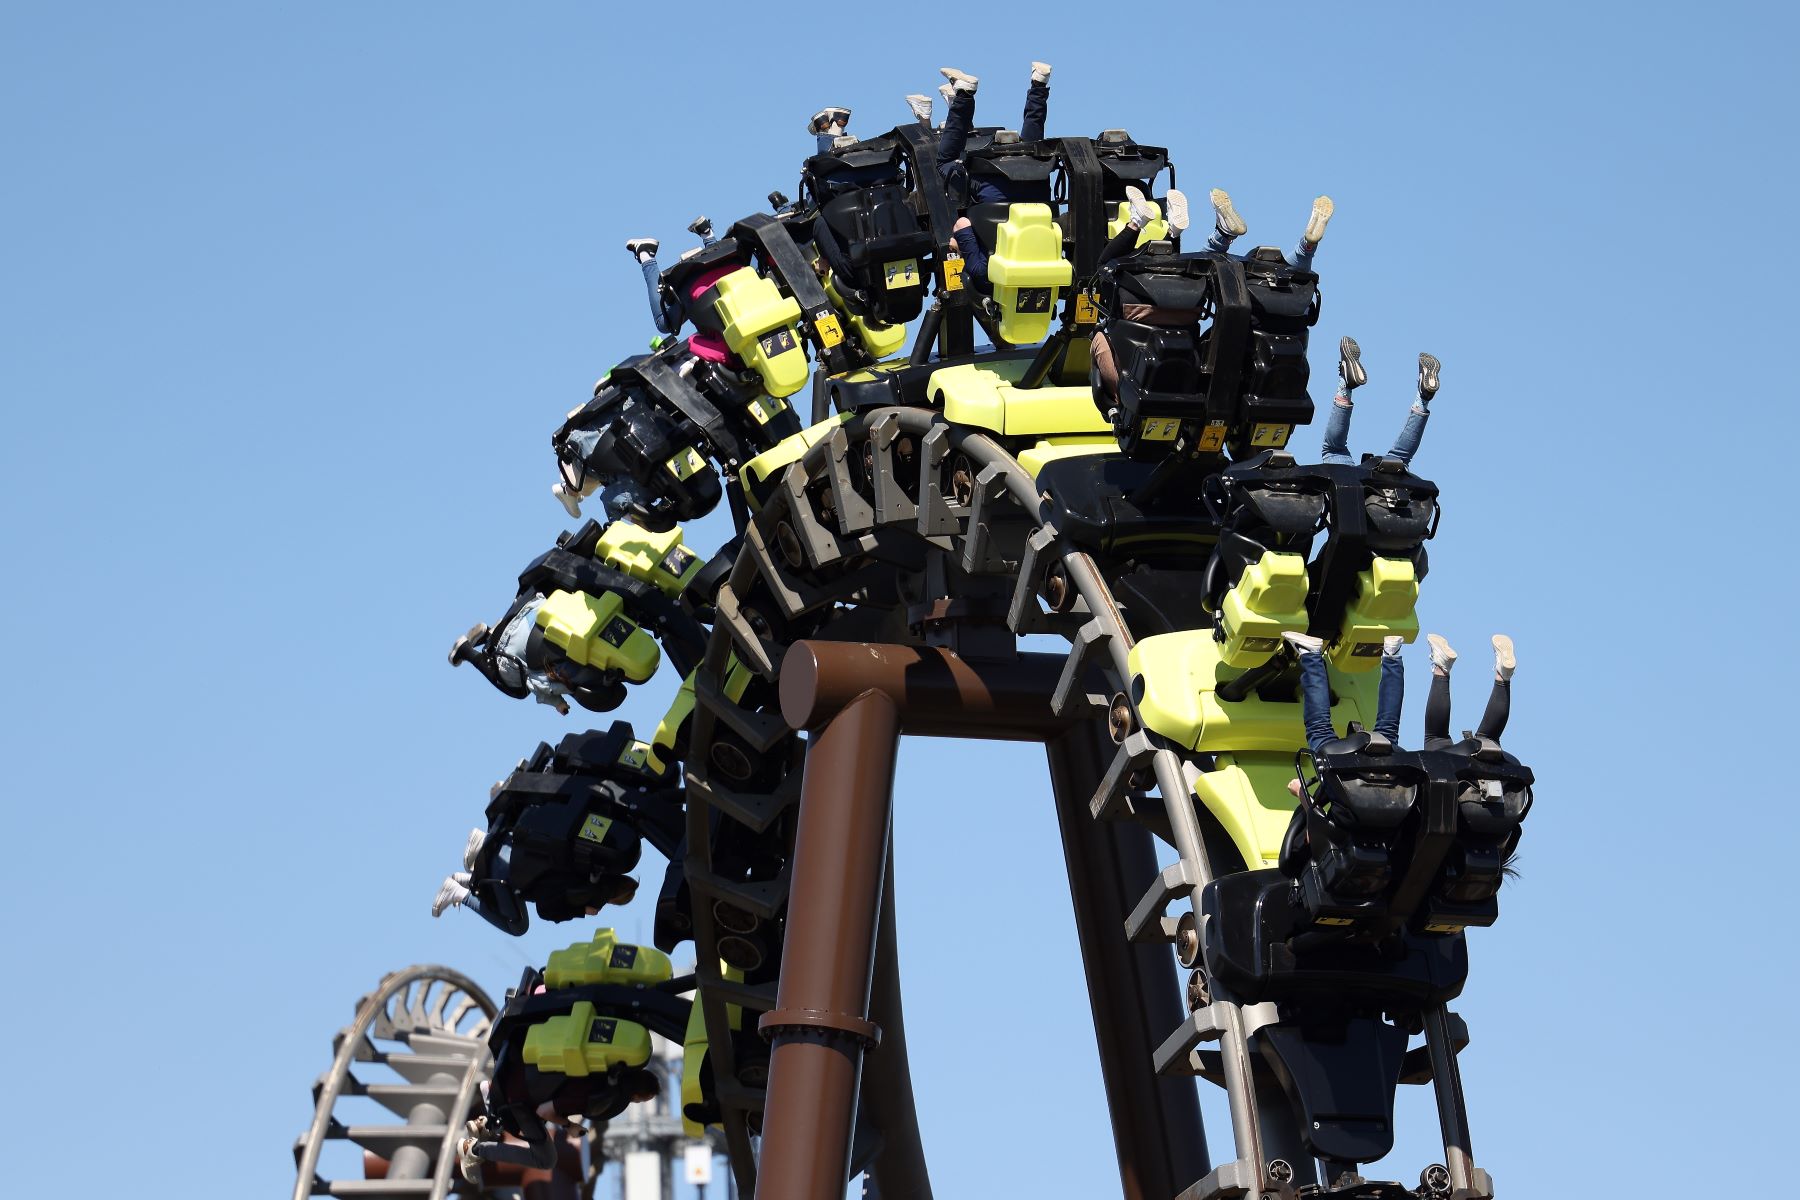 The 'Lucky Luke - The Ride The Daltons Break Out' roller coaster at Bottrop's Moviepark